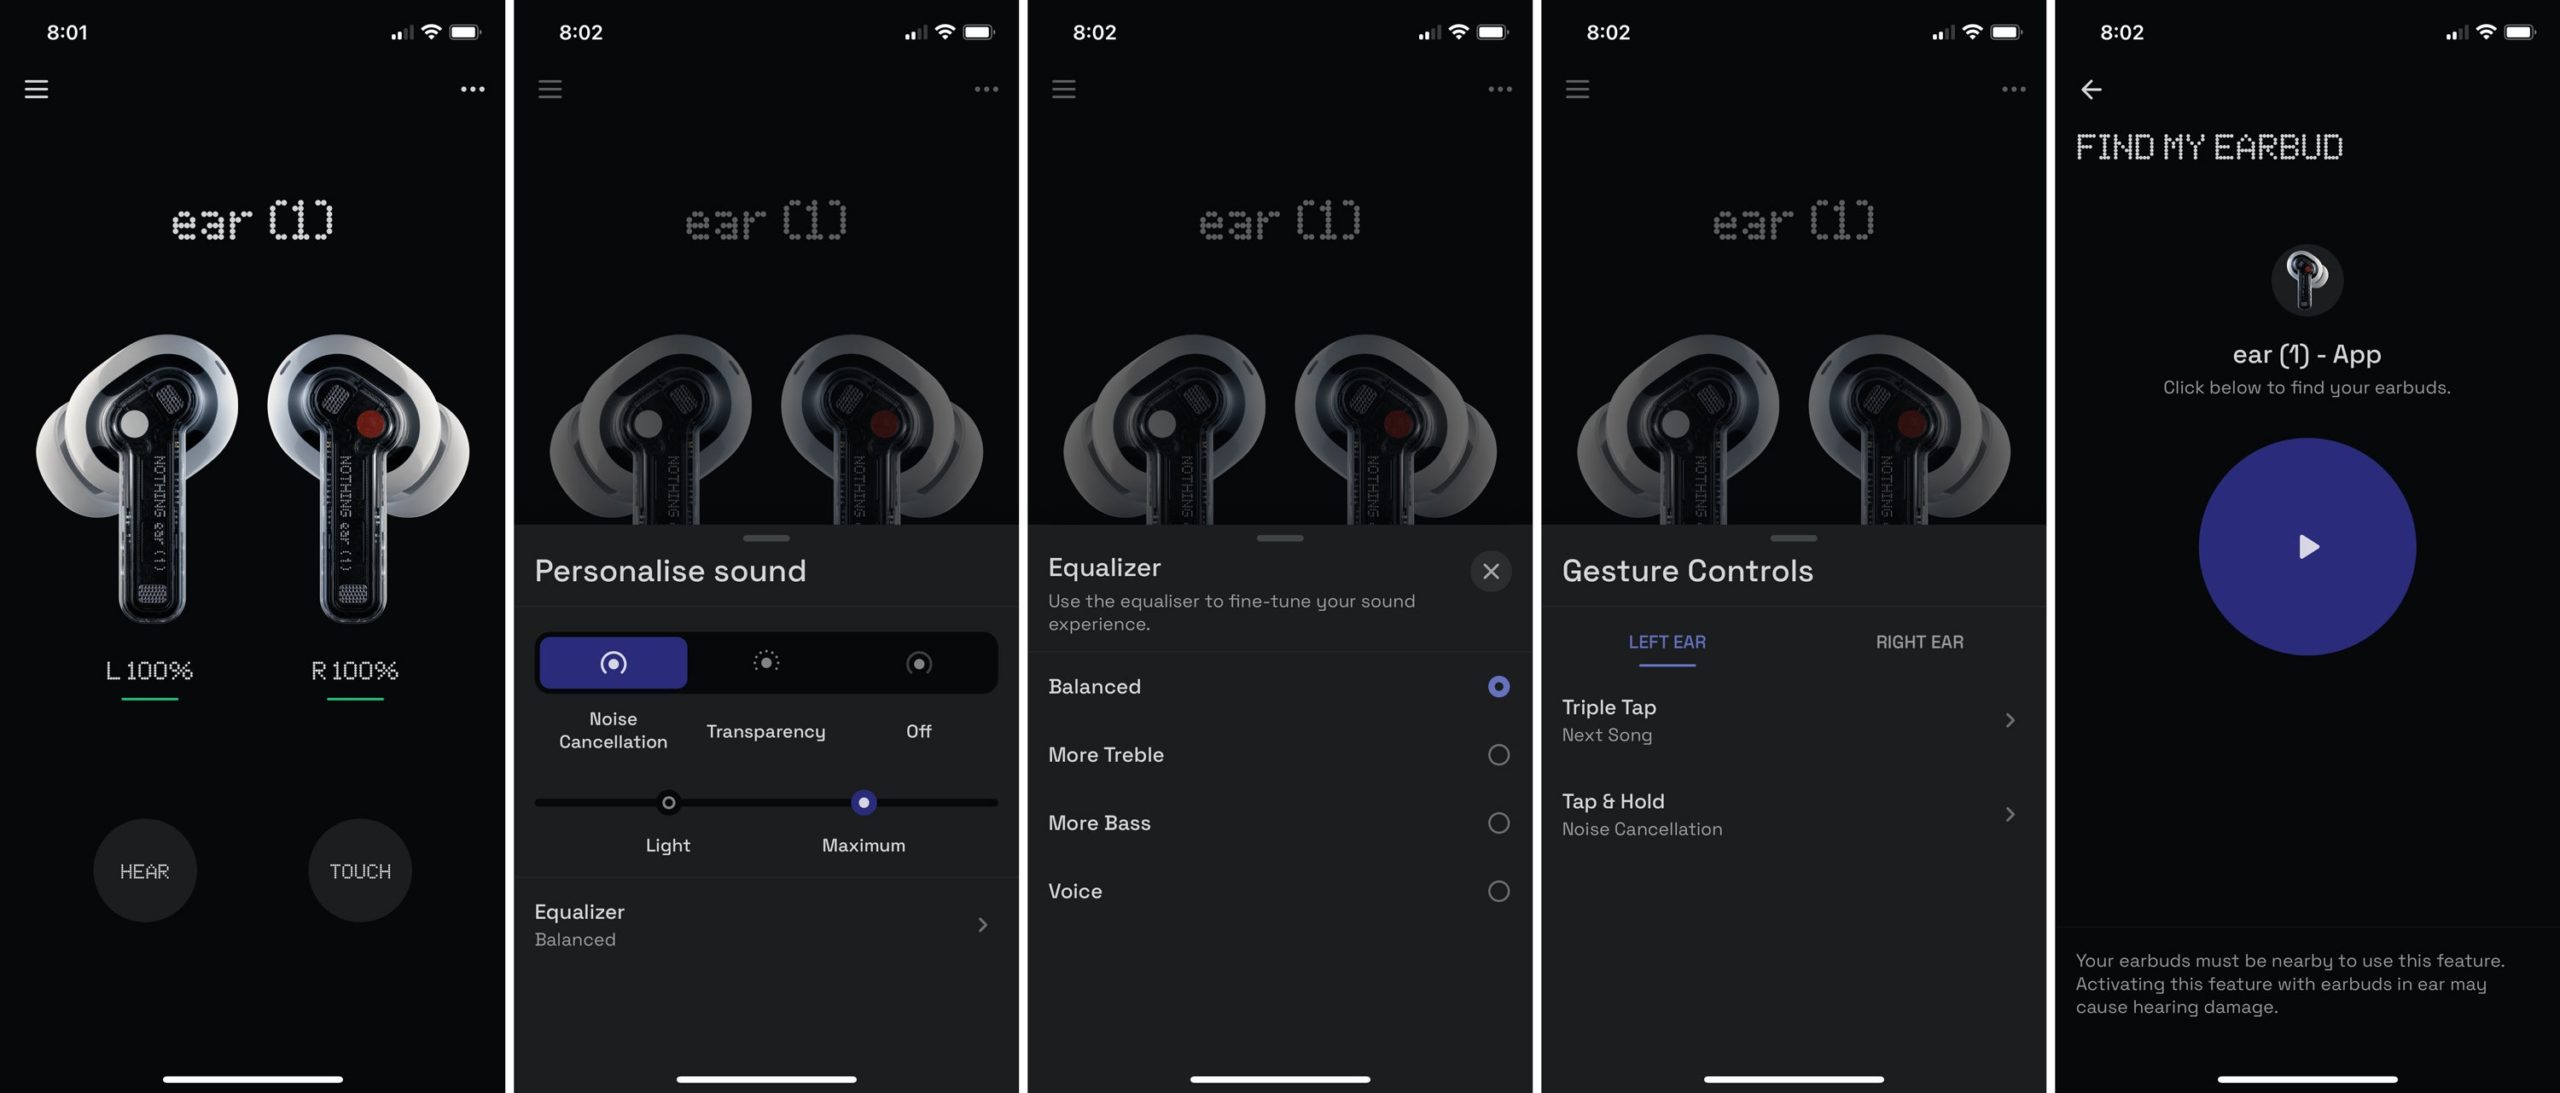 The app's best feature is an earbud finder which triggers each bud to play a high-pitched tone so they're easier to locate. (Screenshot: Andrew Liszewski - Gizmodo)